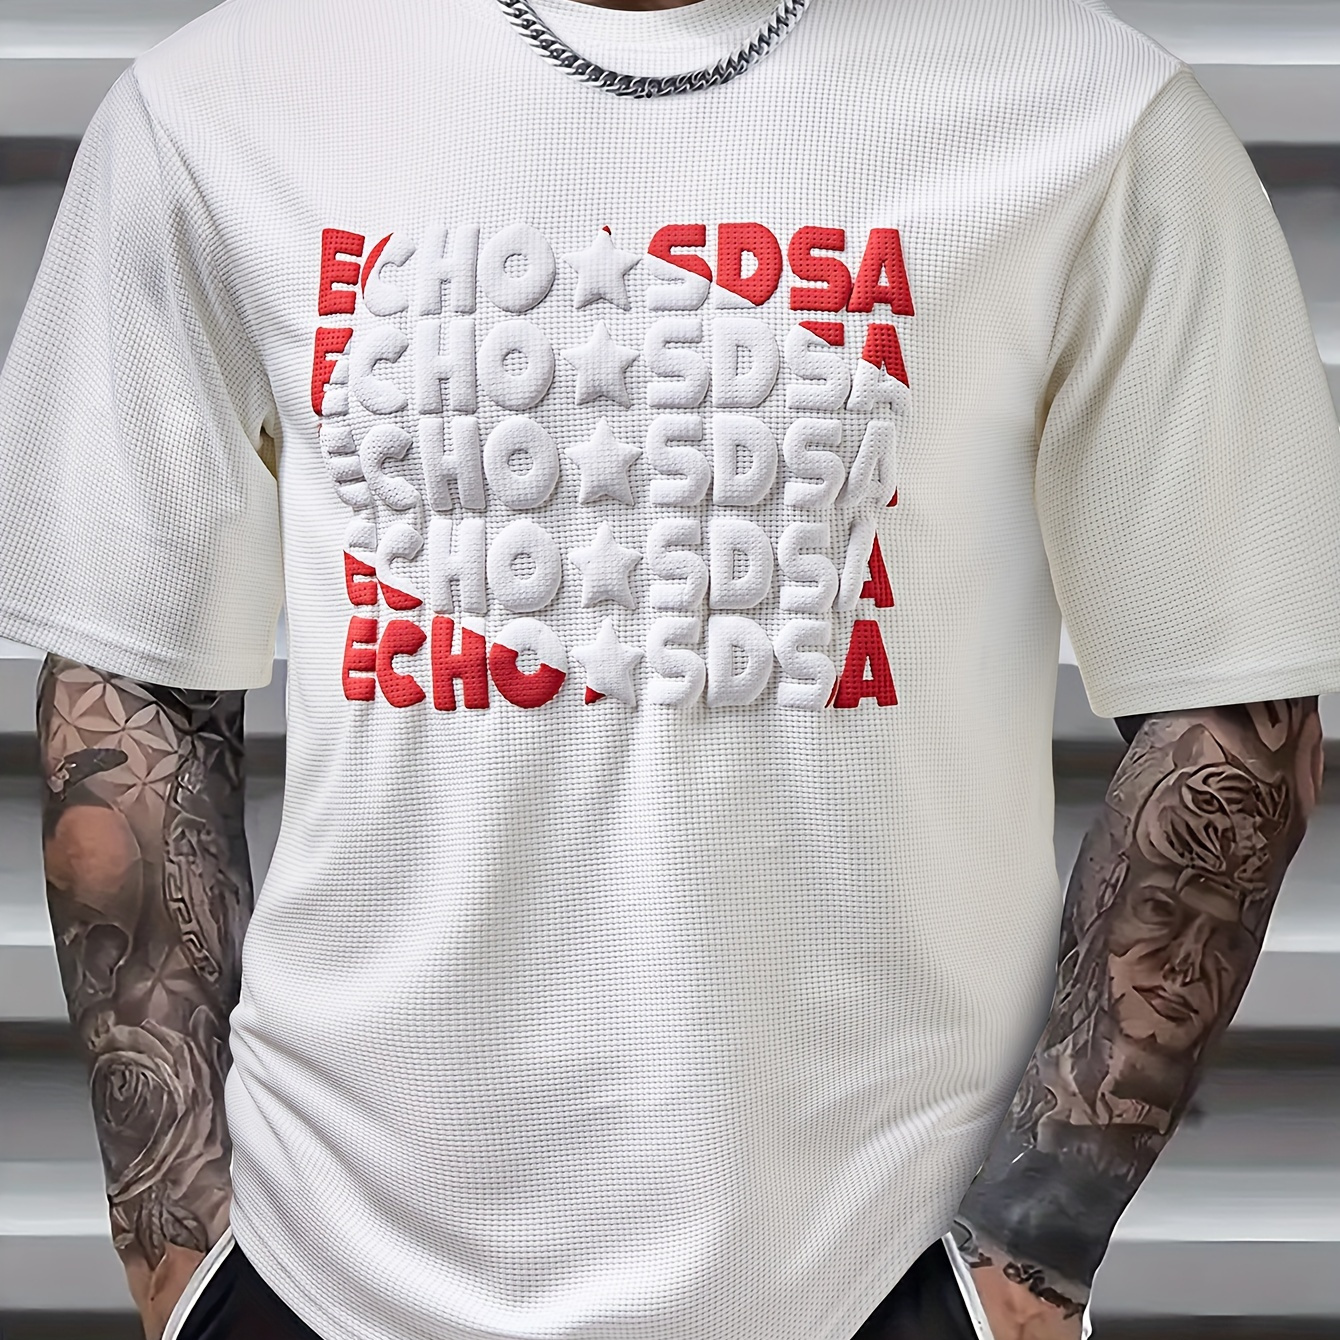 

Men's Alphabet Foam Print "echo Sdsa" Waffle Knit T-shirt With Crew Neck And Short Sleeve, Casual And Chic Tops For Men's Summer Outdoors Wear